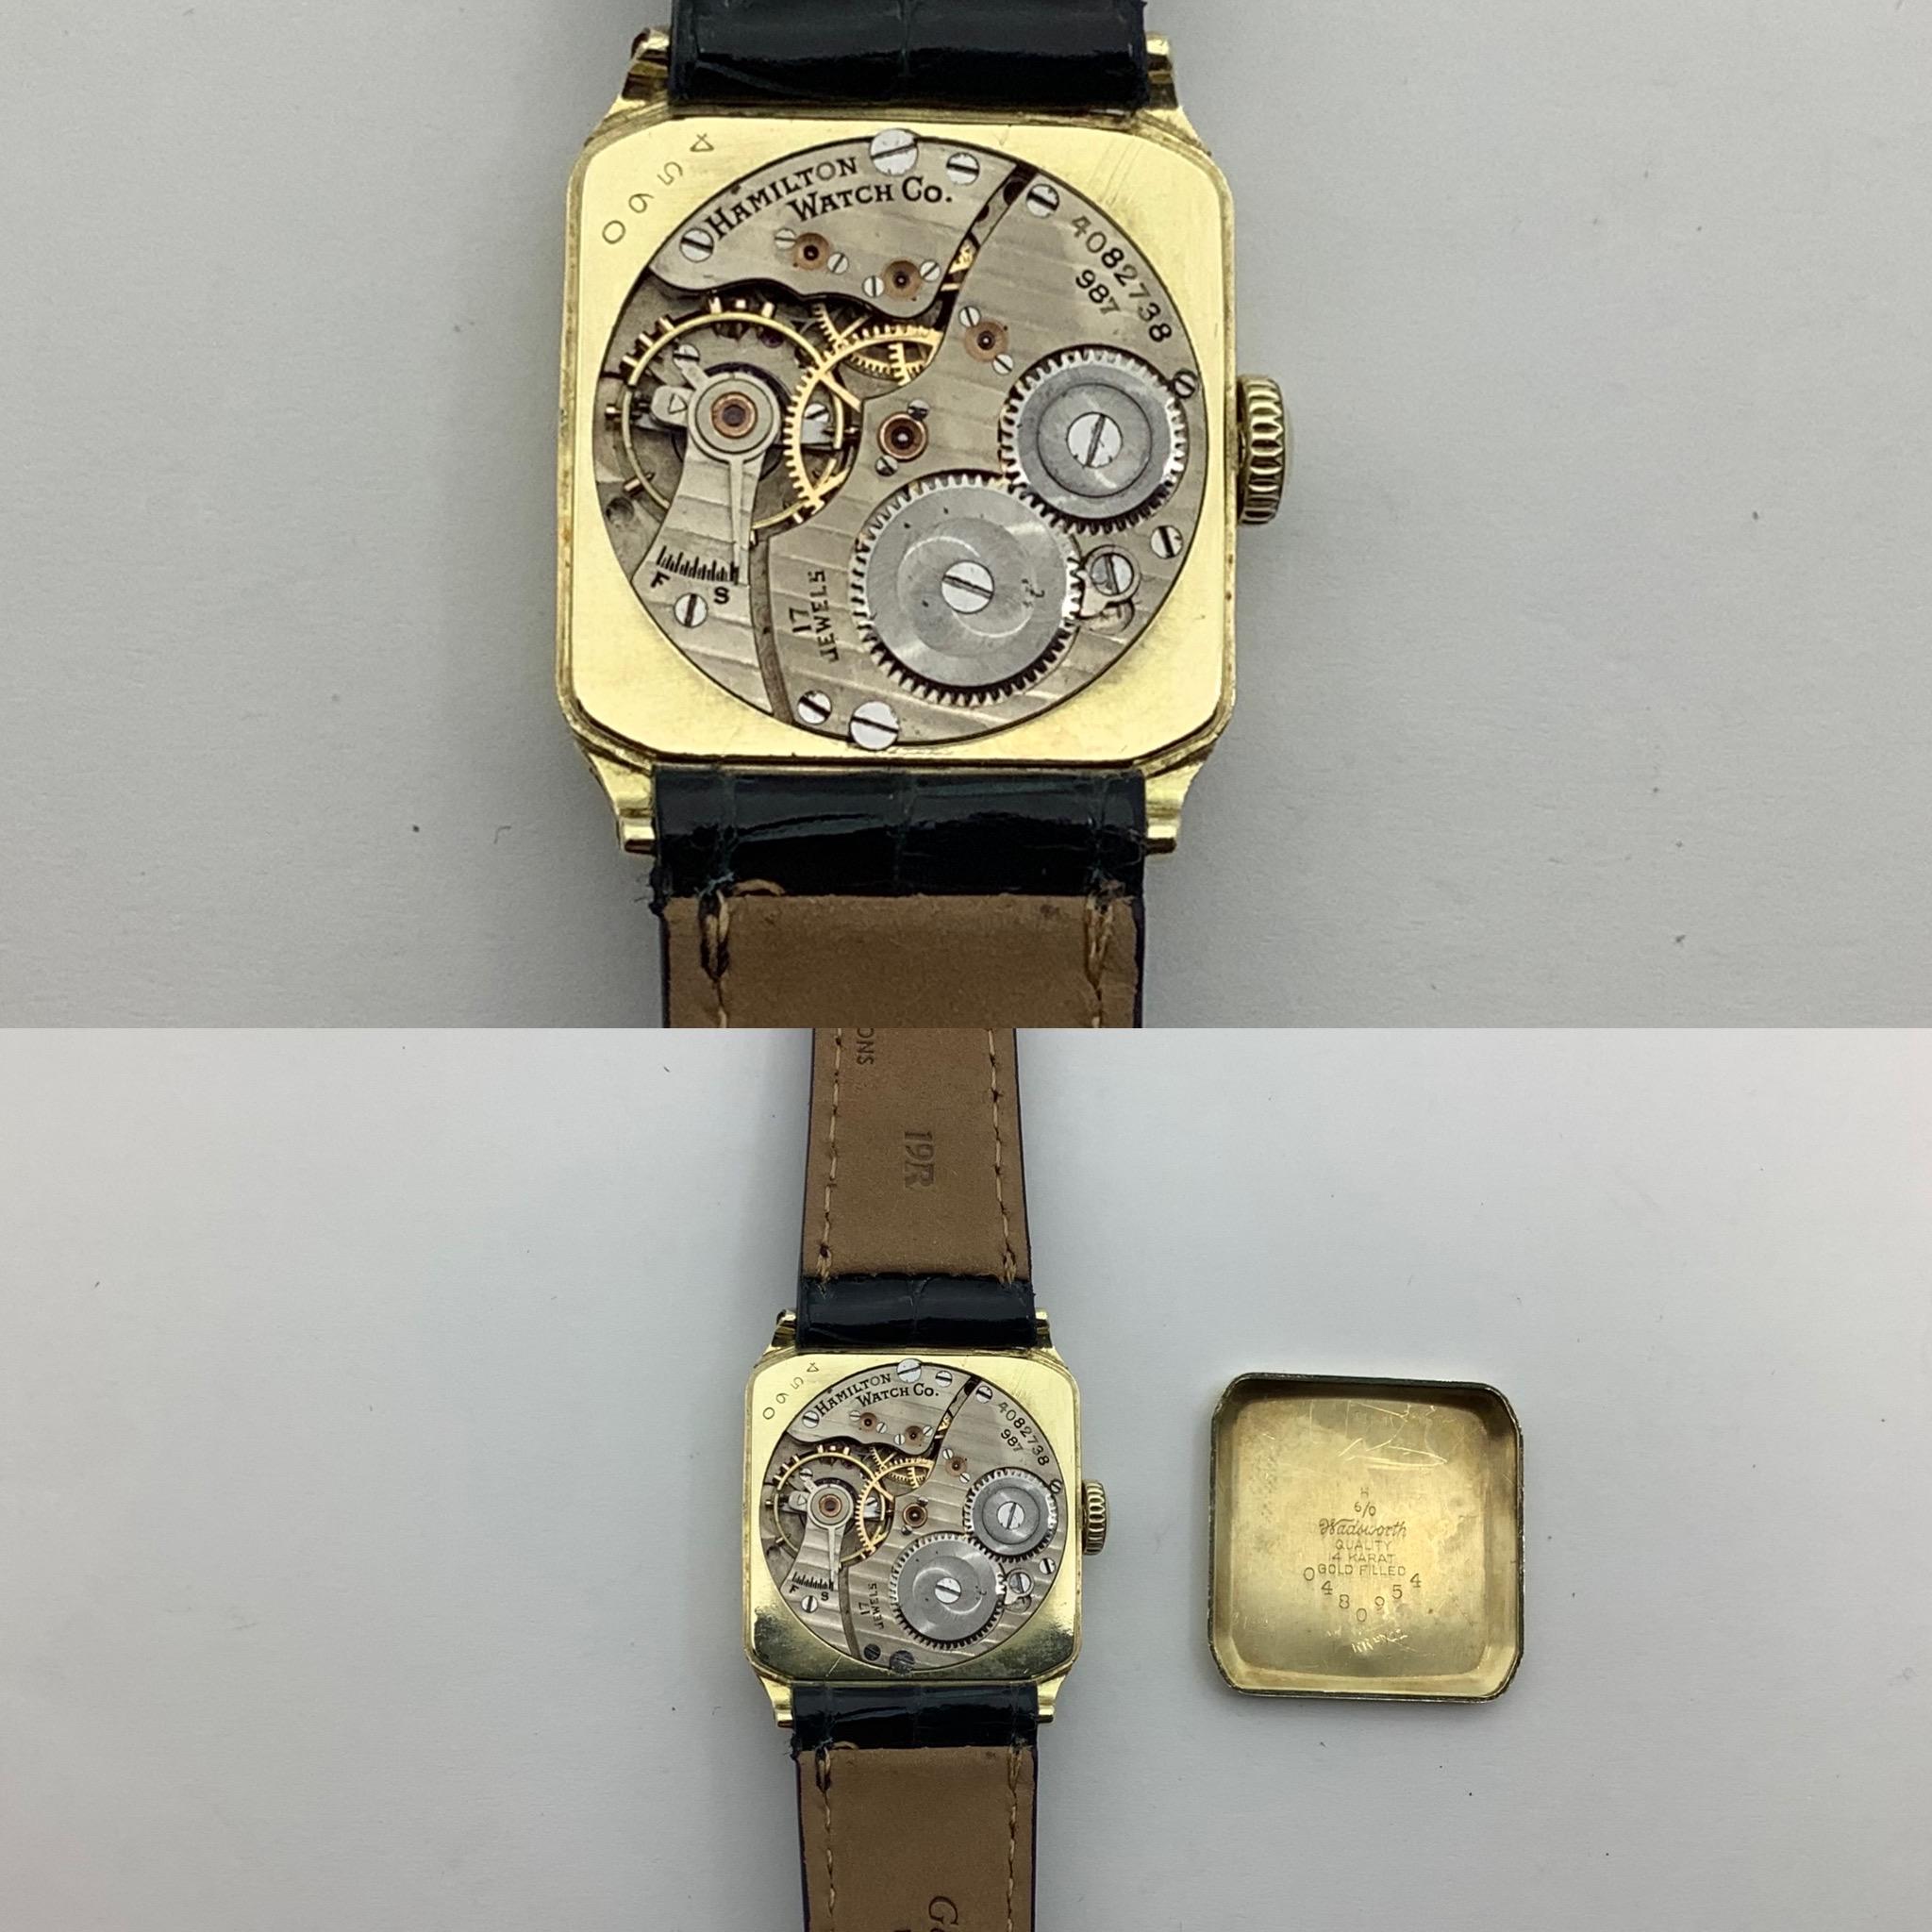 What you see is a well, a preserved Art Deco Hamilton Tonneau that was built in 1928. The interest in this watch is due to the extraordinary restoration.  The dial are hands have been restored to their original with aged luminous material to keep